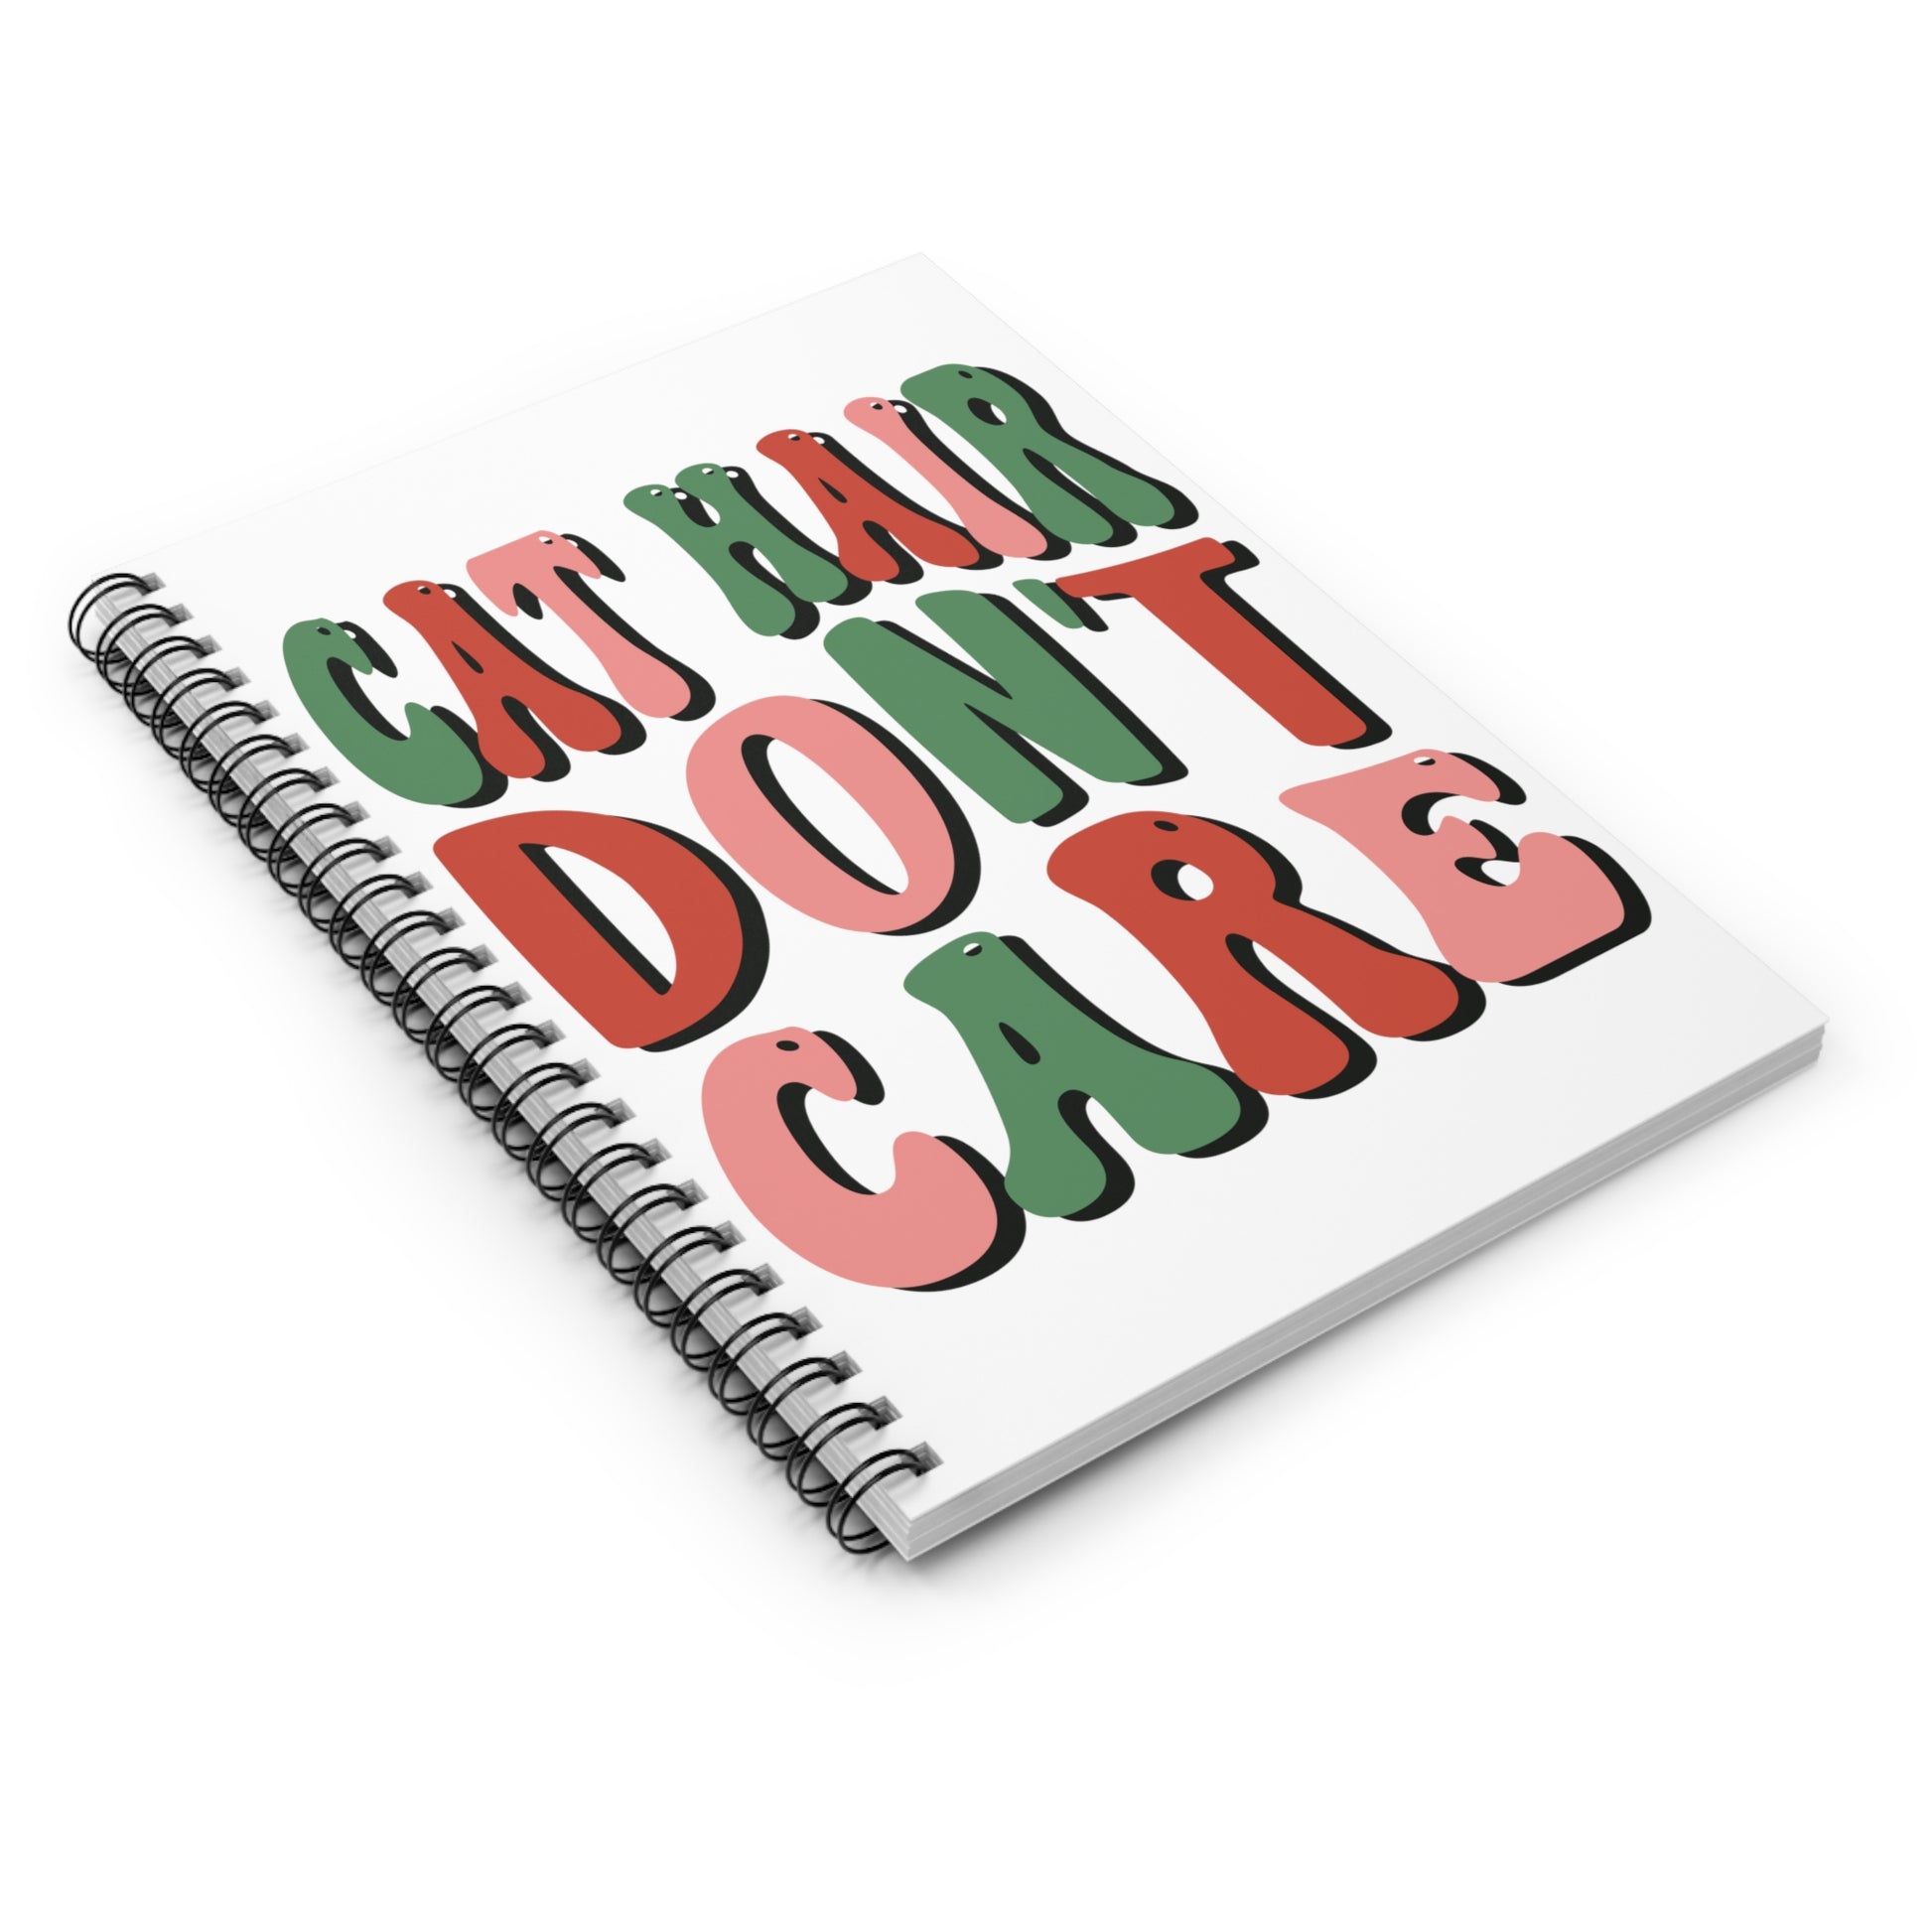 Cat Hair Don't Care: Spiral Notebook - Log Books - Journals - Diaries - and More Custom Printed by TheGlassyLass